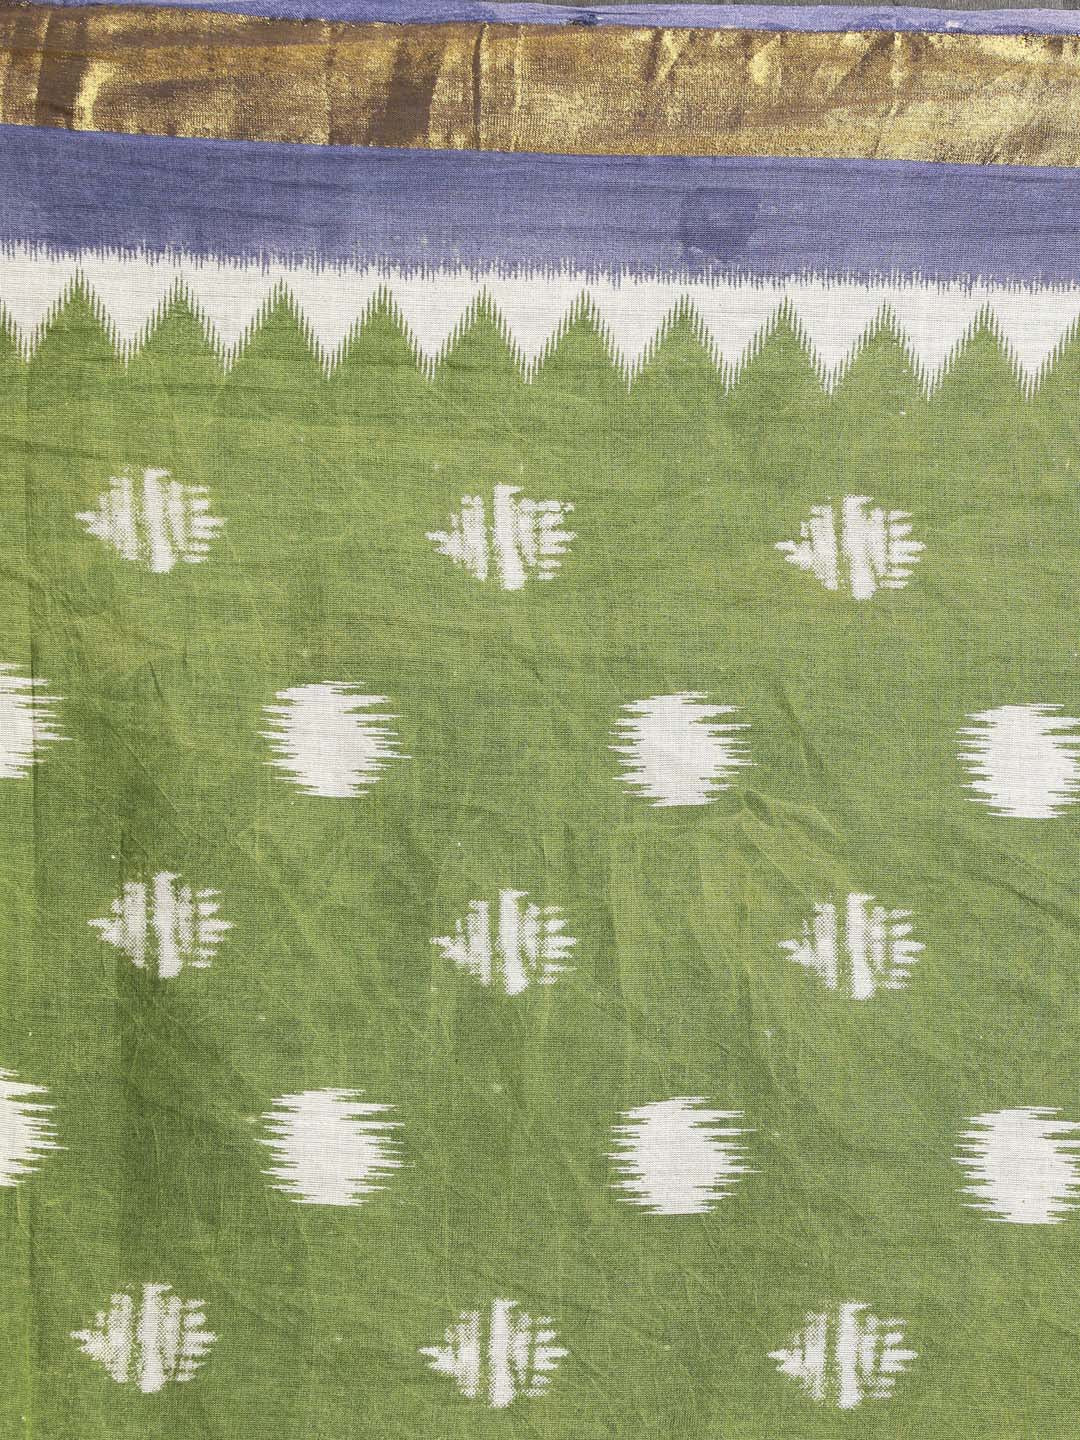 Indethnic Printed Pure Cotton Saree in Green - Saree Detail View